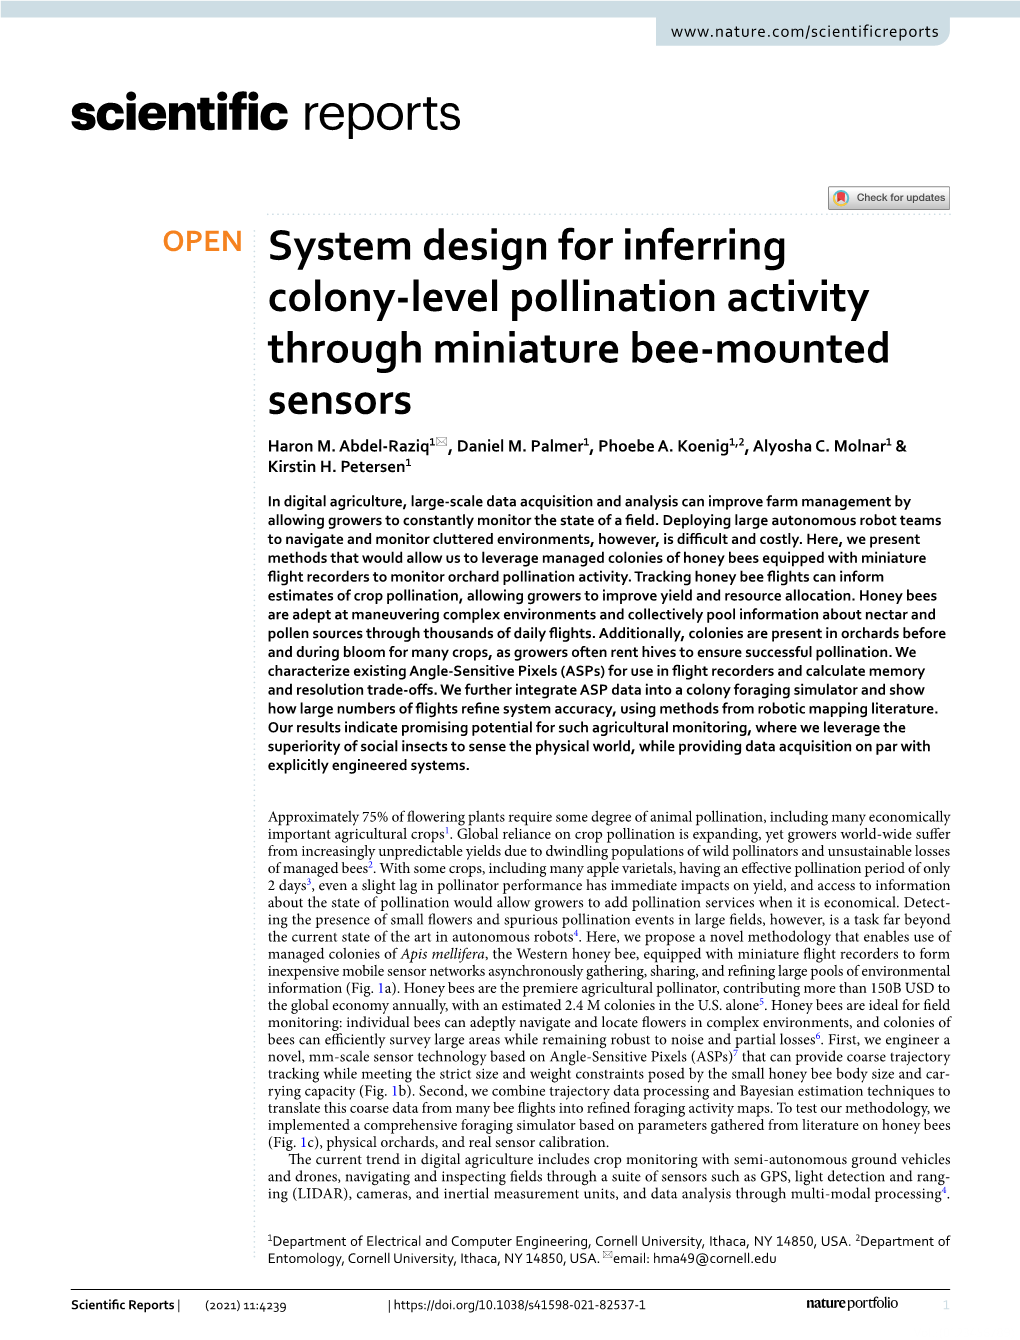 System Design for Inferring Colony-Level Pollination Activity